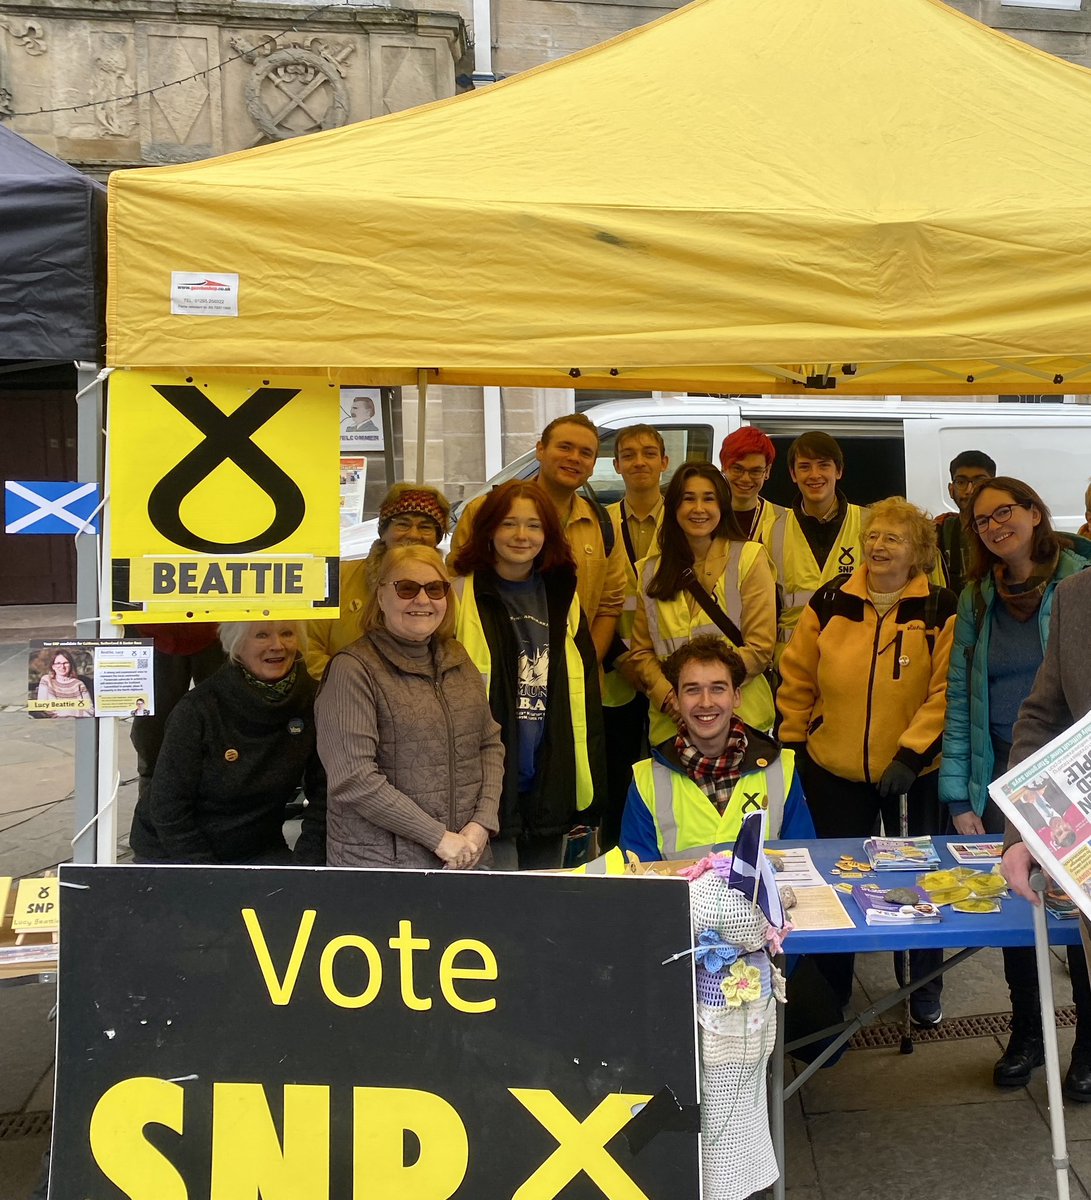 This weekend was a massive success for the independence movement across the country

Thousands and thousands of activists marched through the streets of Glasgow with @believeinscot, while @YSINational activists spent days knocking on doors in Dingwall. Fabulous!